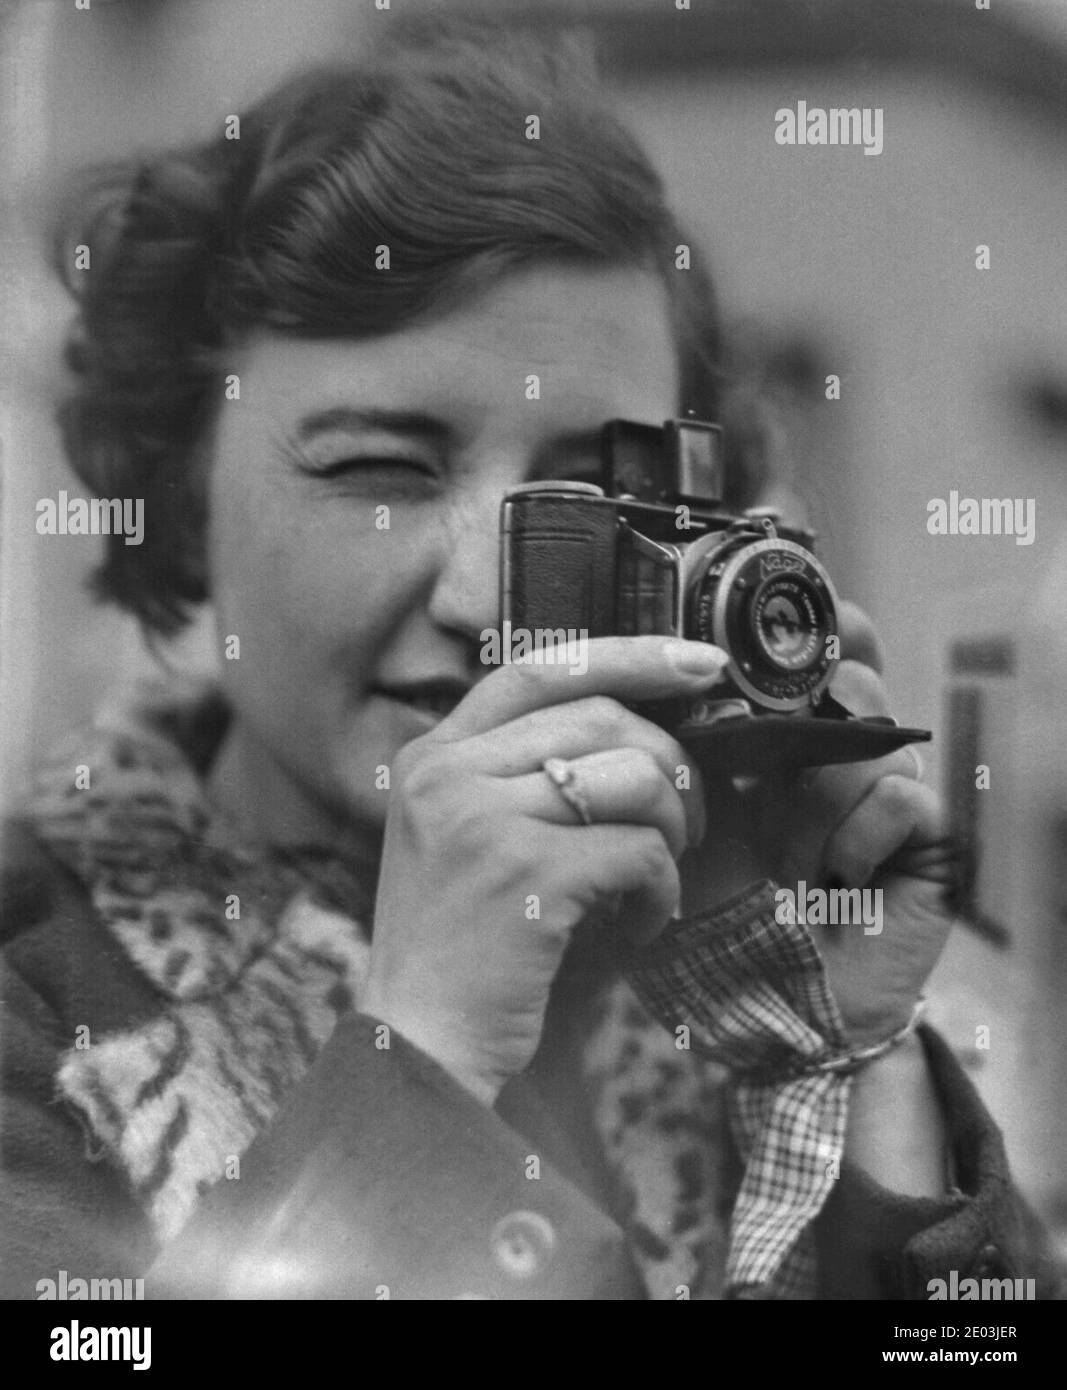 1930s, historical, a young lady closing her eyes to focus as she takes a photograph with a 'Nagel'  Vollenda folding compact film camera. Formed by Dr. August Nagel, co-founder of Zeiss Ikon, in Stuggart, Germany in 1928, the company became known for its small format camera Nagel-Pupille. The camera used here is a Vollenda 48, a compact folding camera that producd 16 exposures on 127 film. It had a folding optical viewfinder. Stock Photo